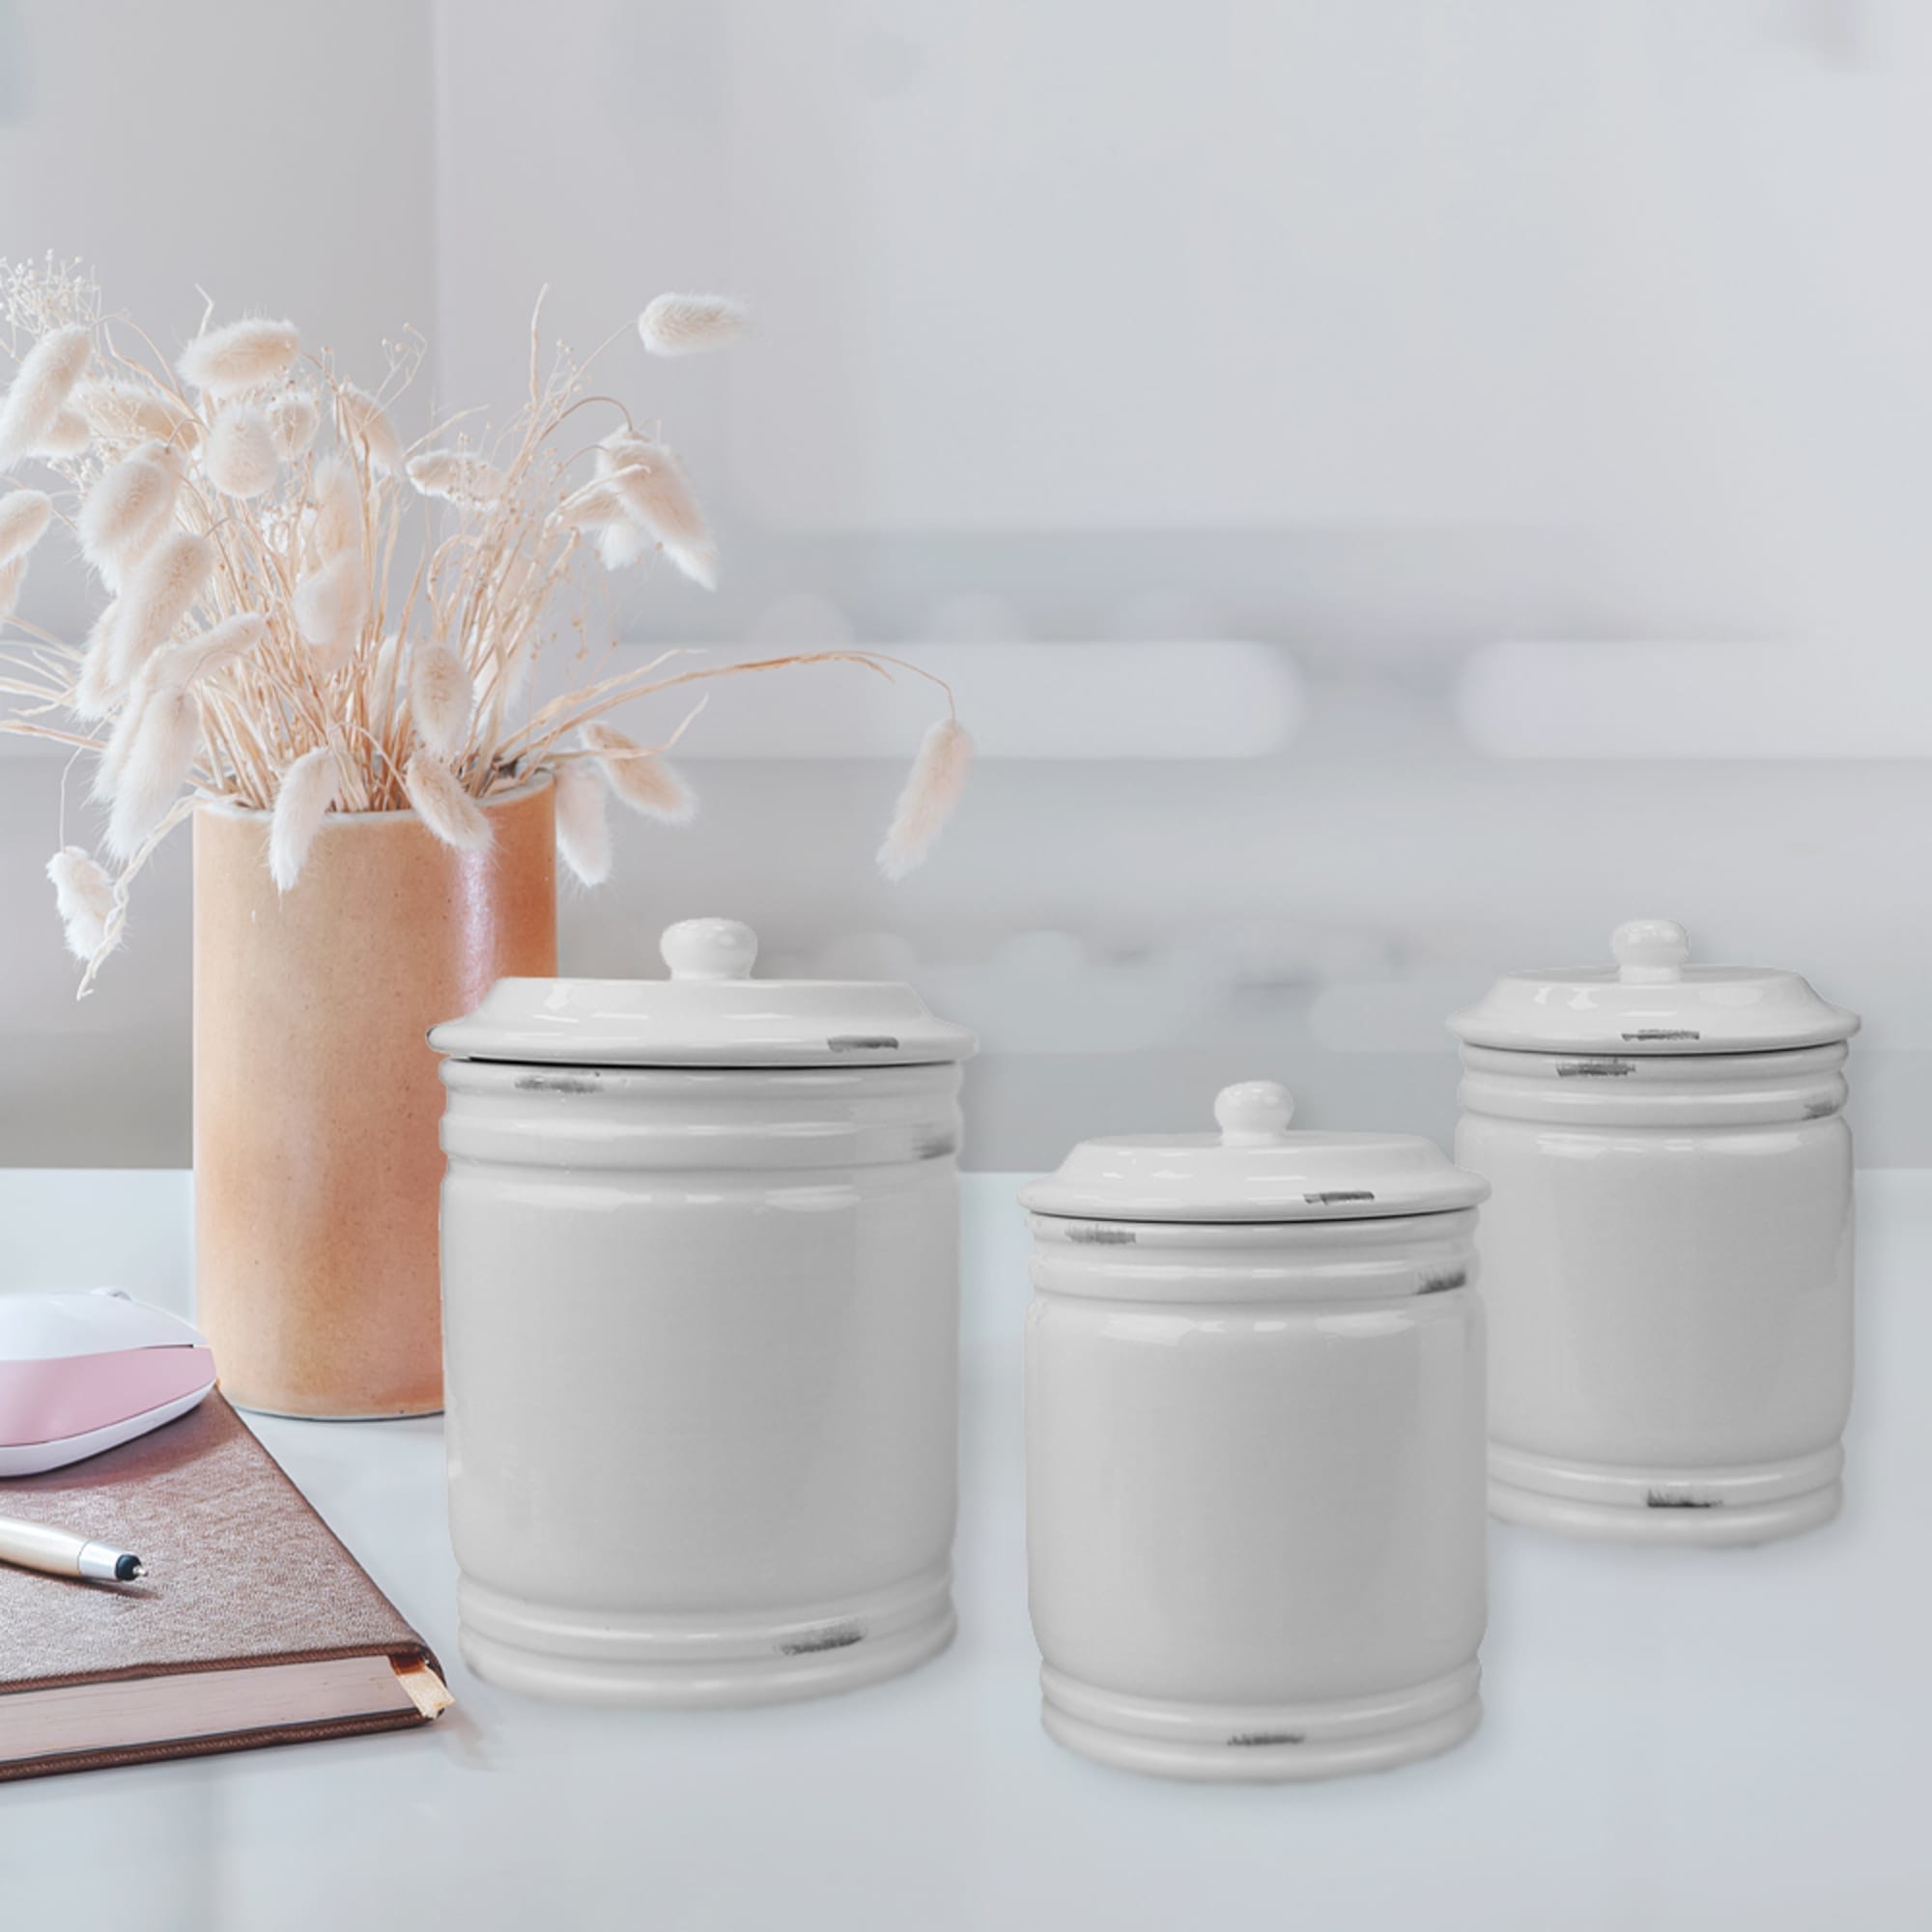 Home Basics Bella 3 Piece Ceramic Canisters, White $20.00 EACH, CASE PACK OF 2